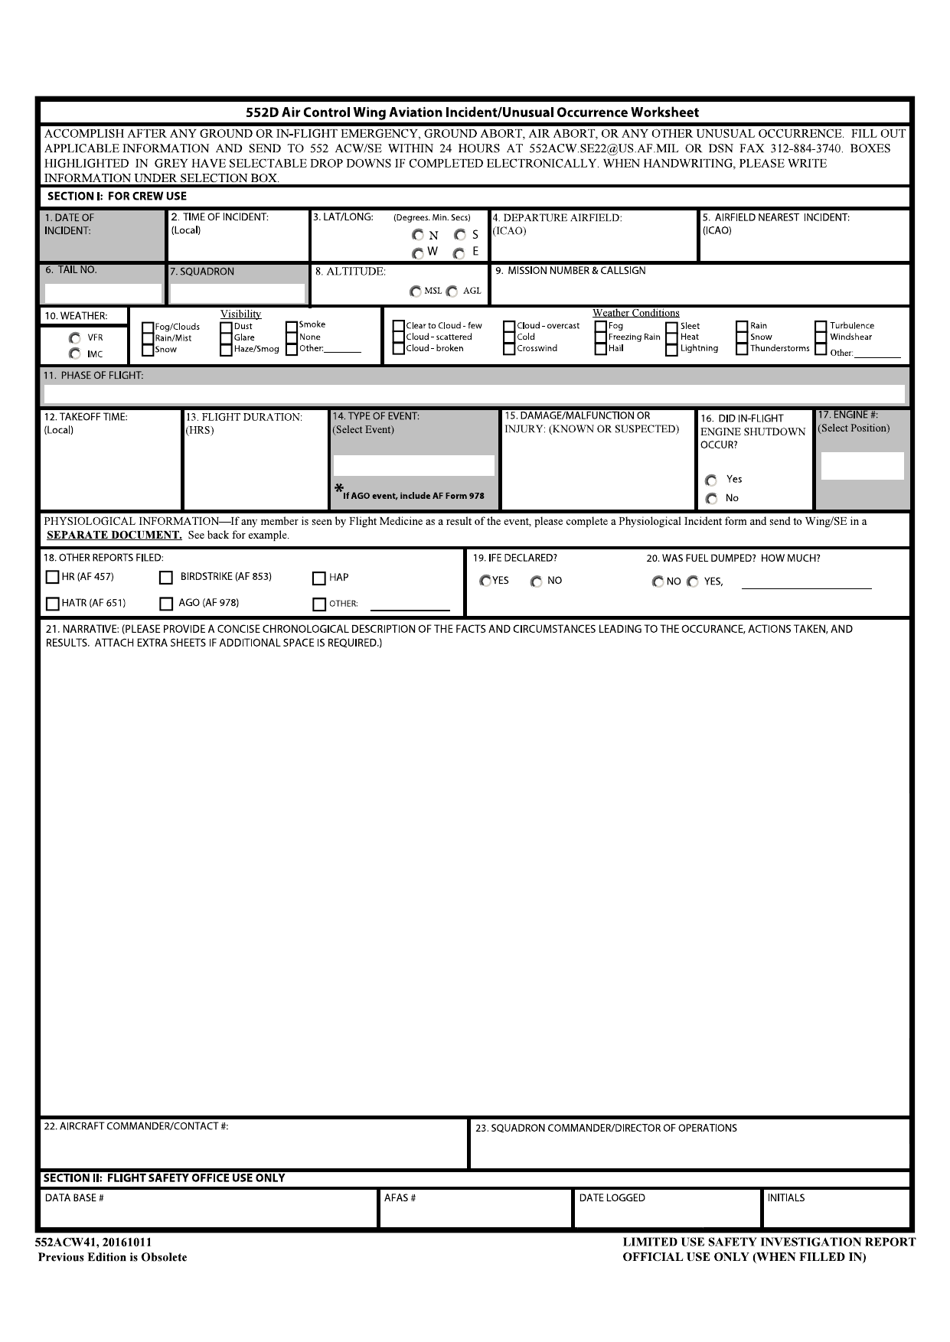 552 ACW Form 41 552 Air Control Wing Aviation Incident / Unusual Occurrence Worksheet, Page 1